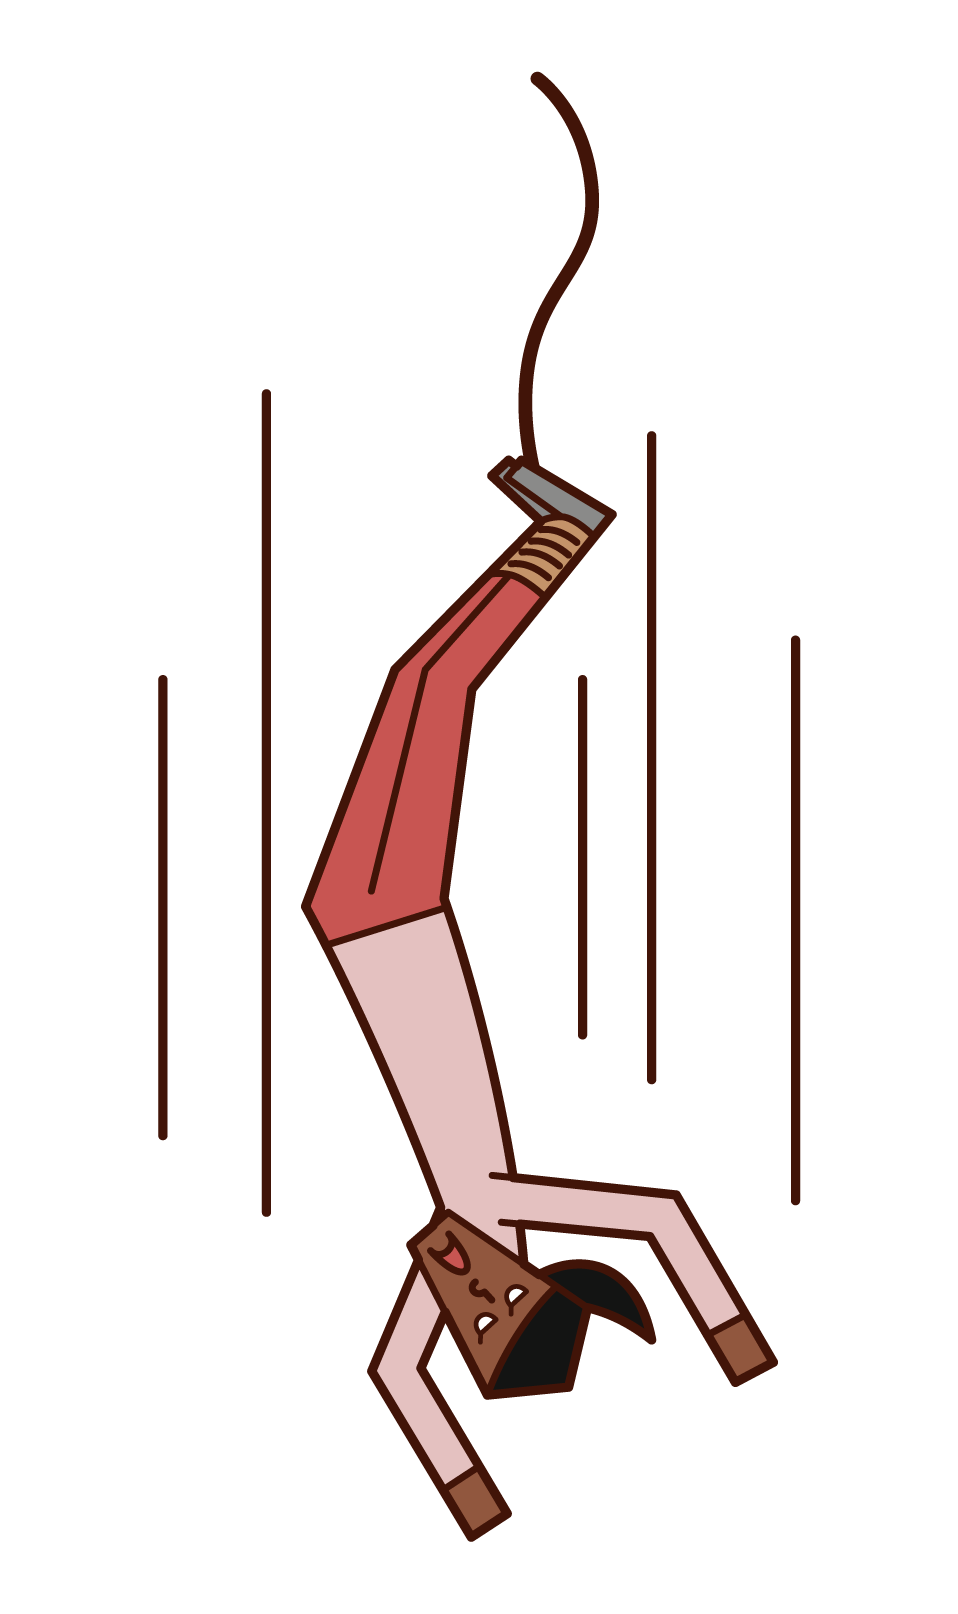 Illustration of a woman bungee jumping